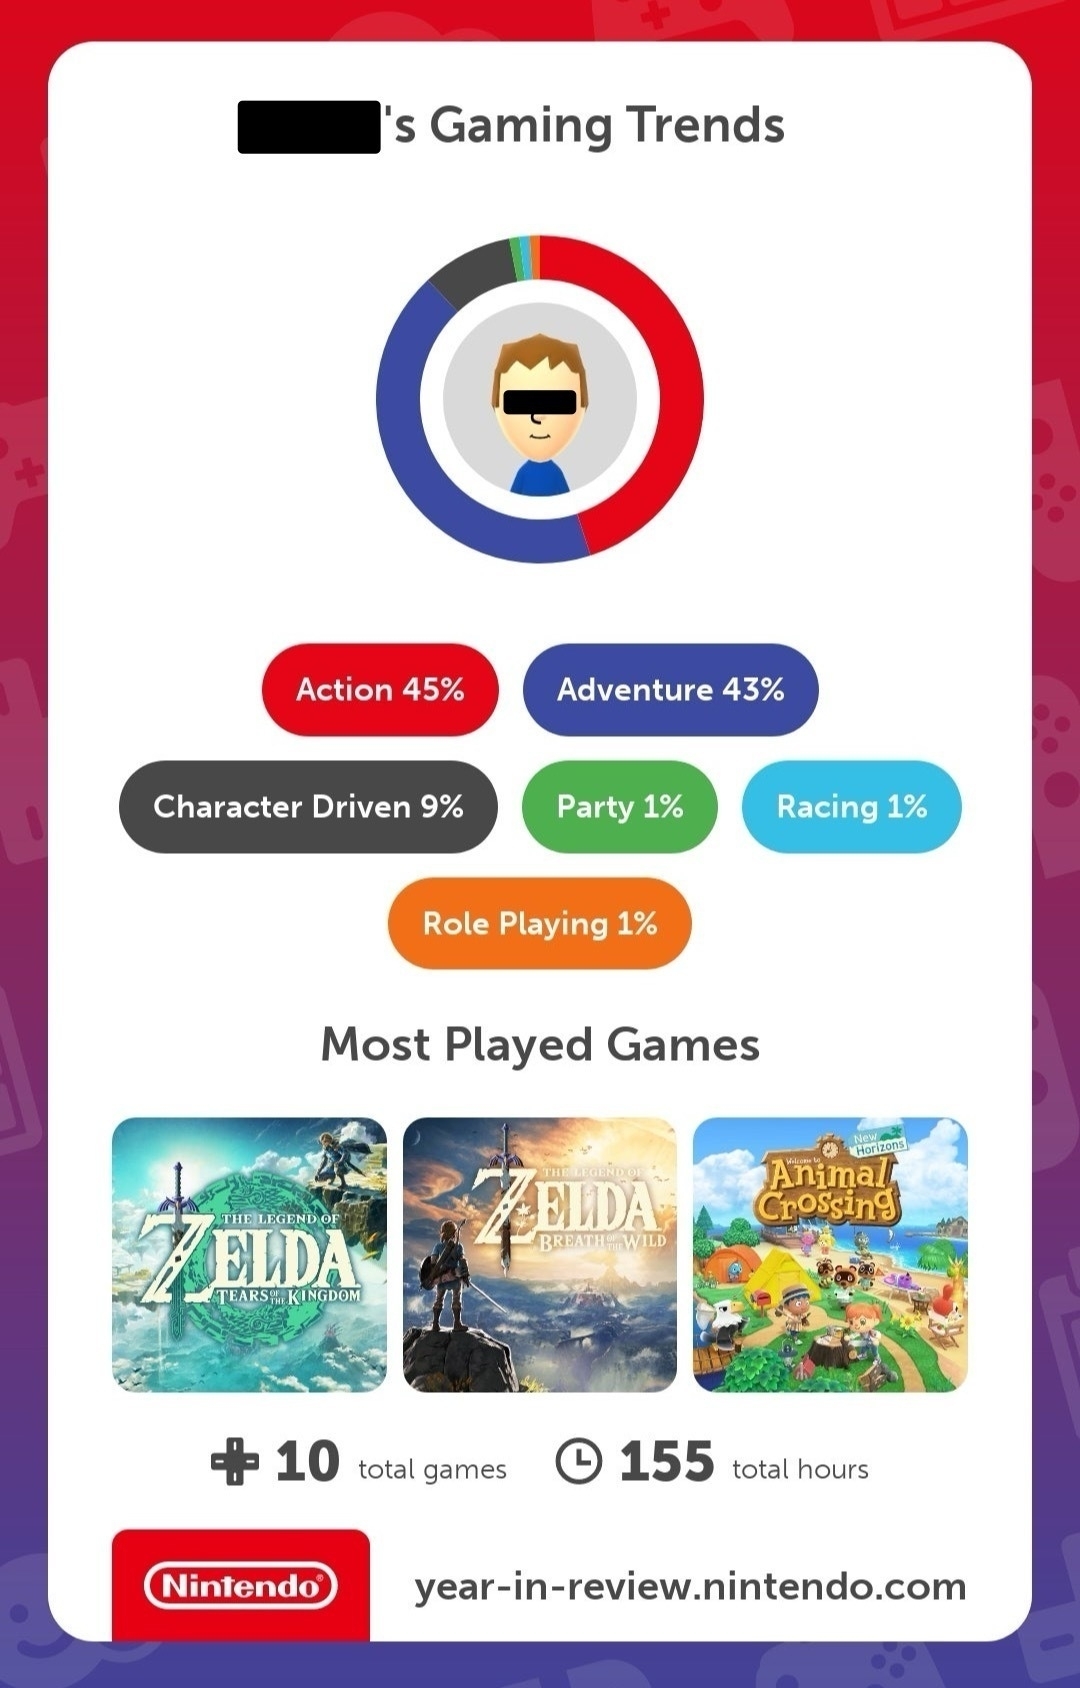 Screen shot of Nintendo's 'Year In Review' showing my gaming trends, along with my top three played games by hours: Zelda Tears of the Kingdom, Zelda Breath of the Wild, and Animal Crossing New Horizons.